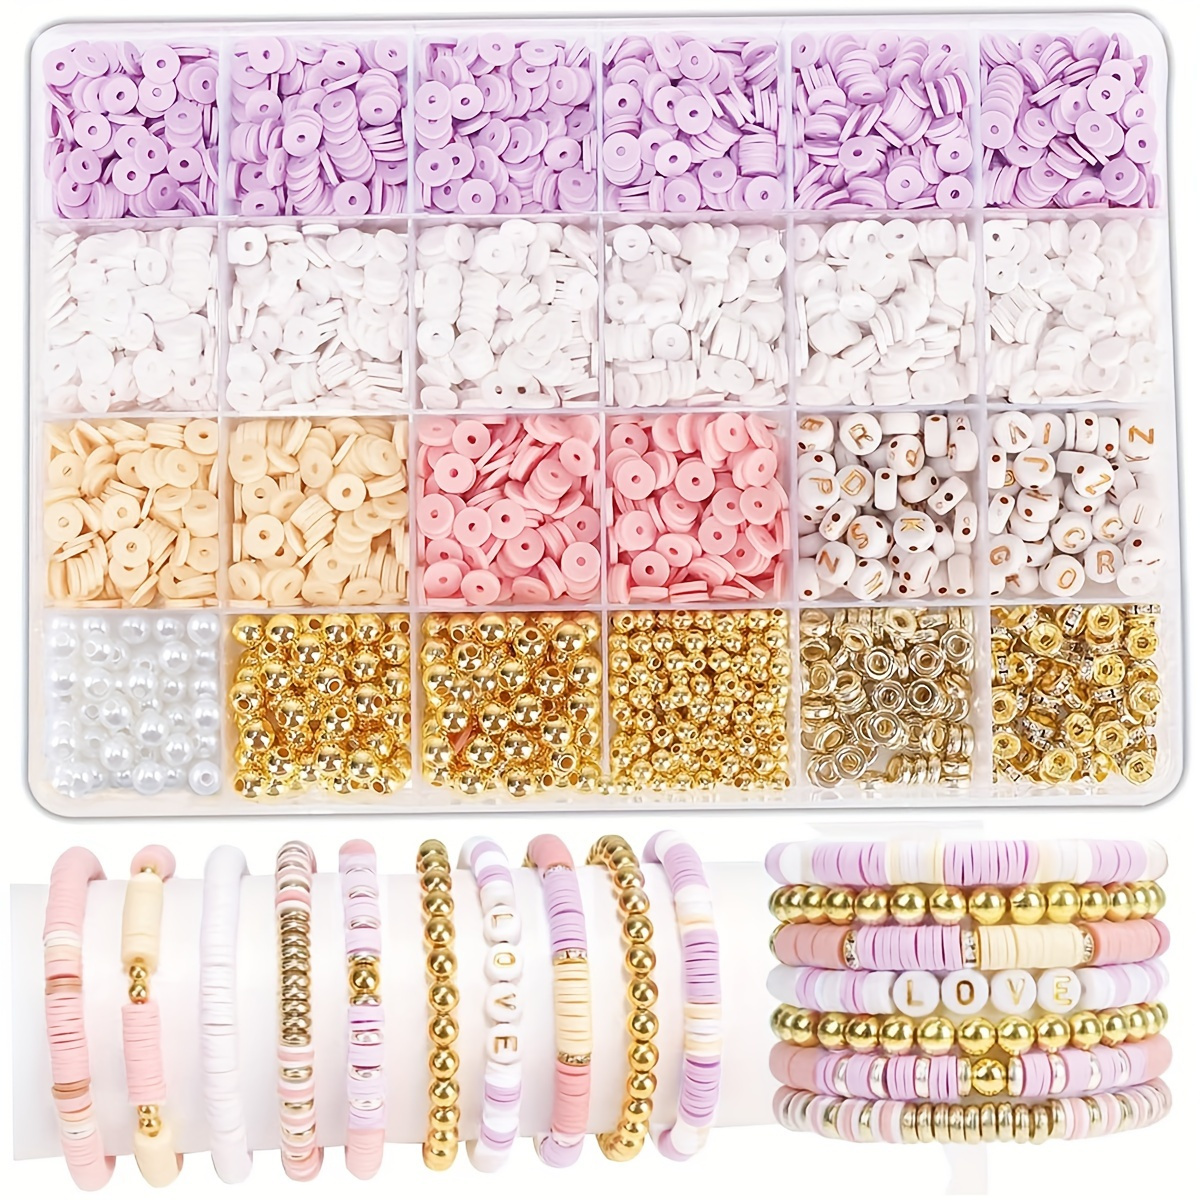 

1600-piece Bohemian Style Diy Bracelet Making Kit With Golden Letter Beads, Ccb Spacers & Crystal String - Pink, White, Brown Polymer Clay Friendship Bracelet Craft Set For Women